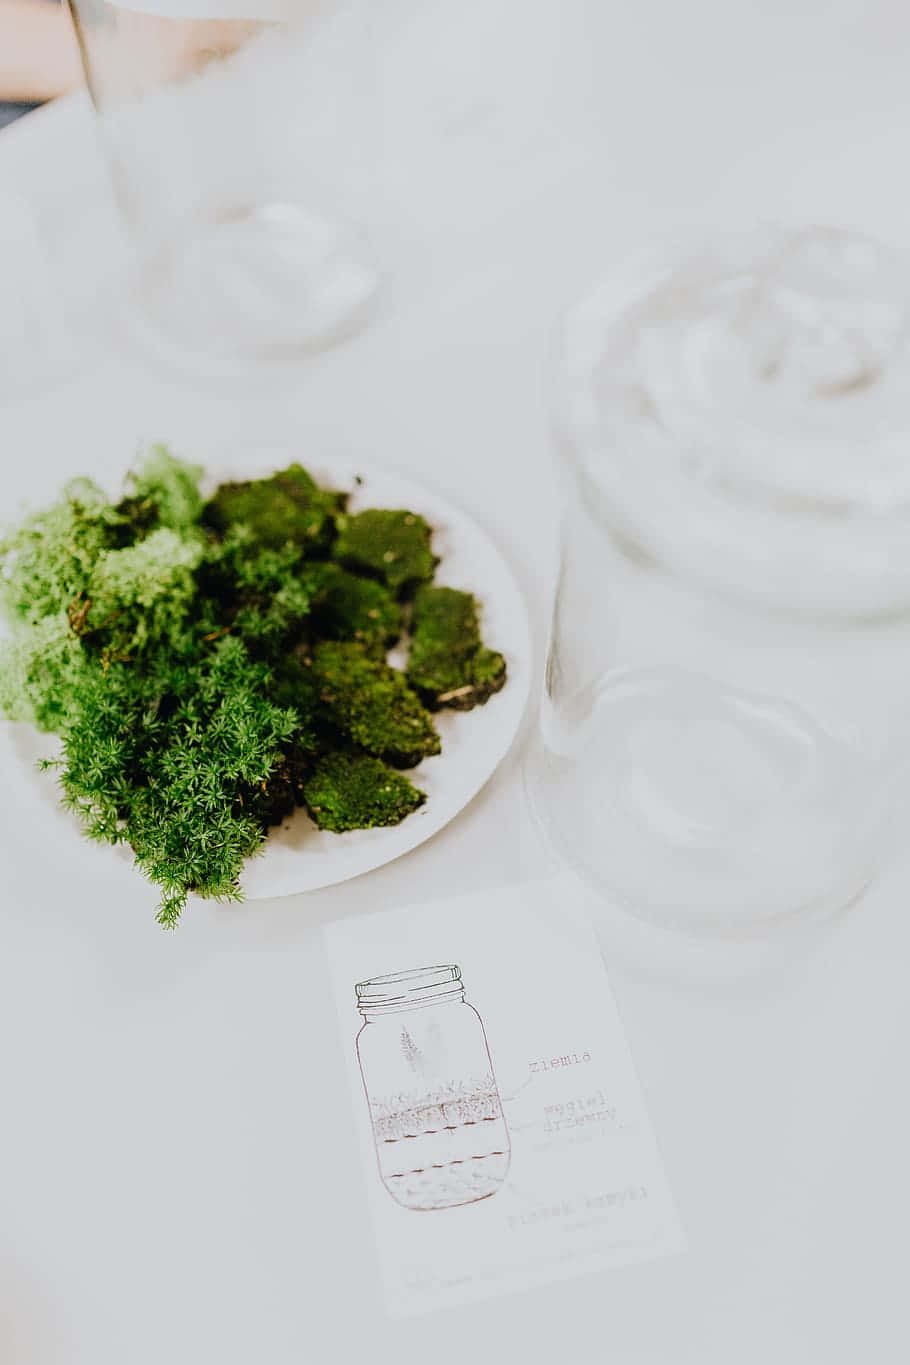 A Plate With Moss And A Card On It